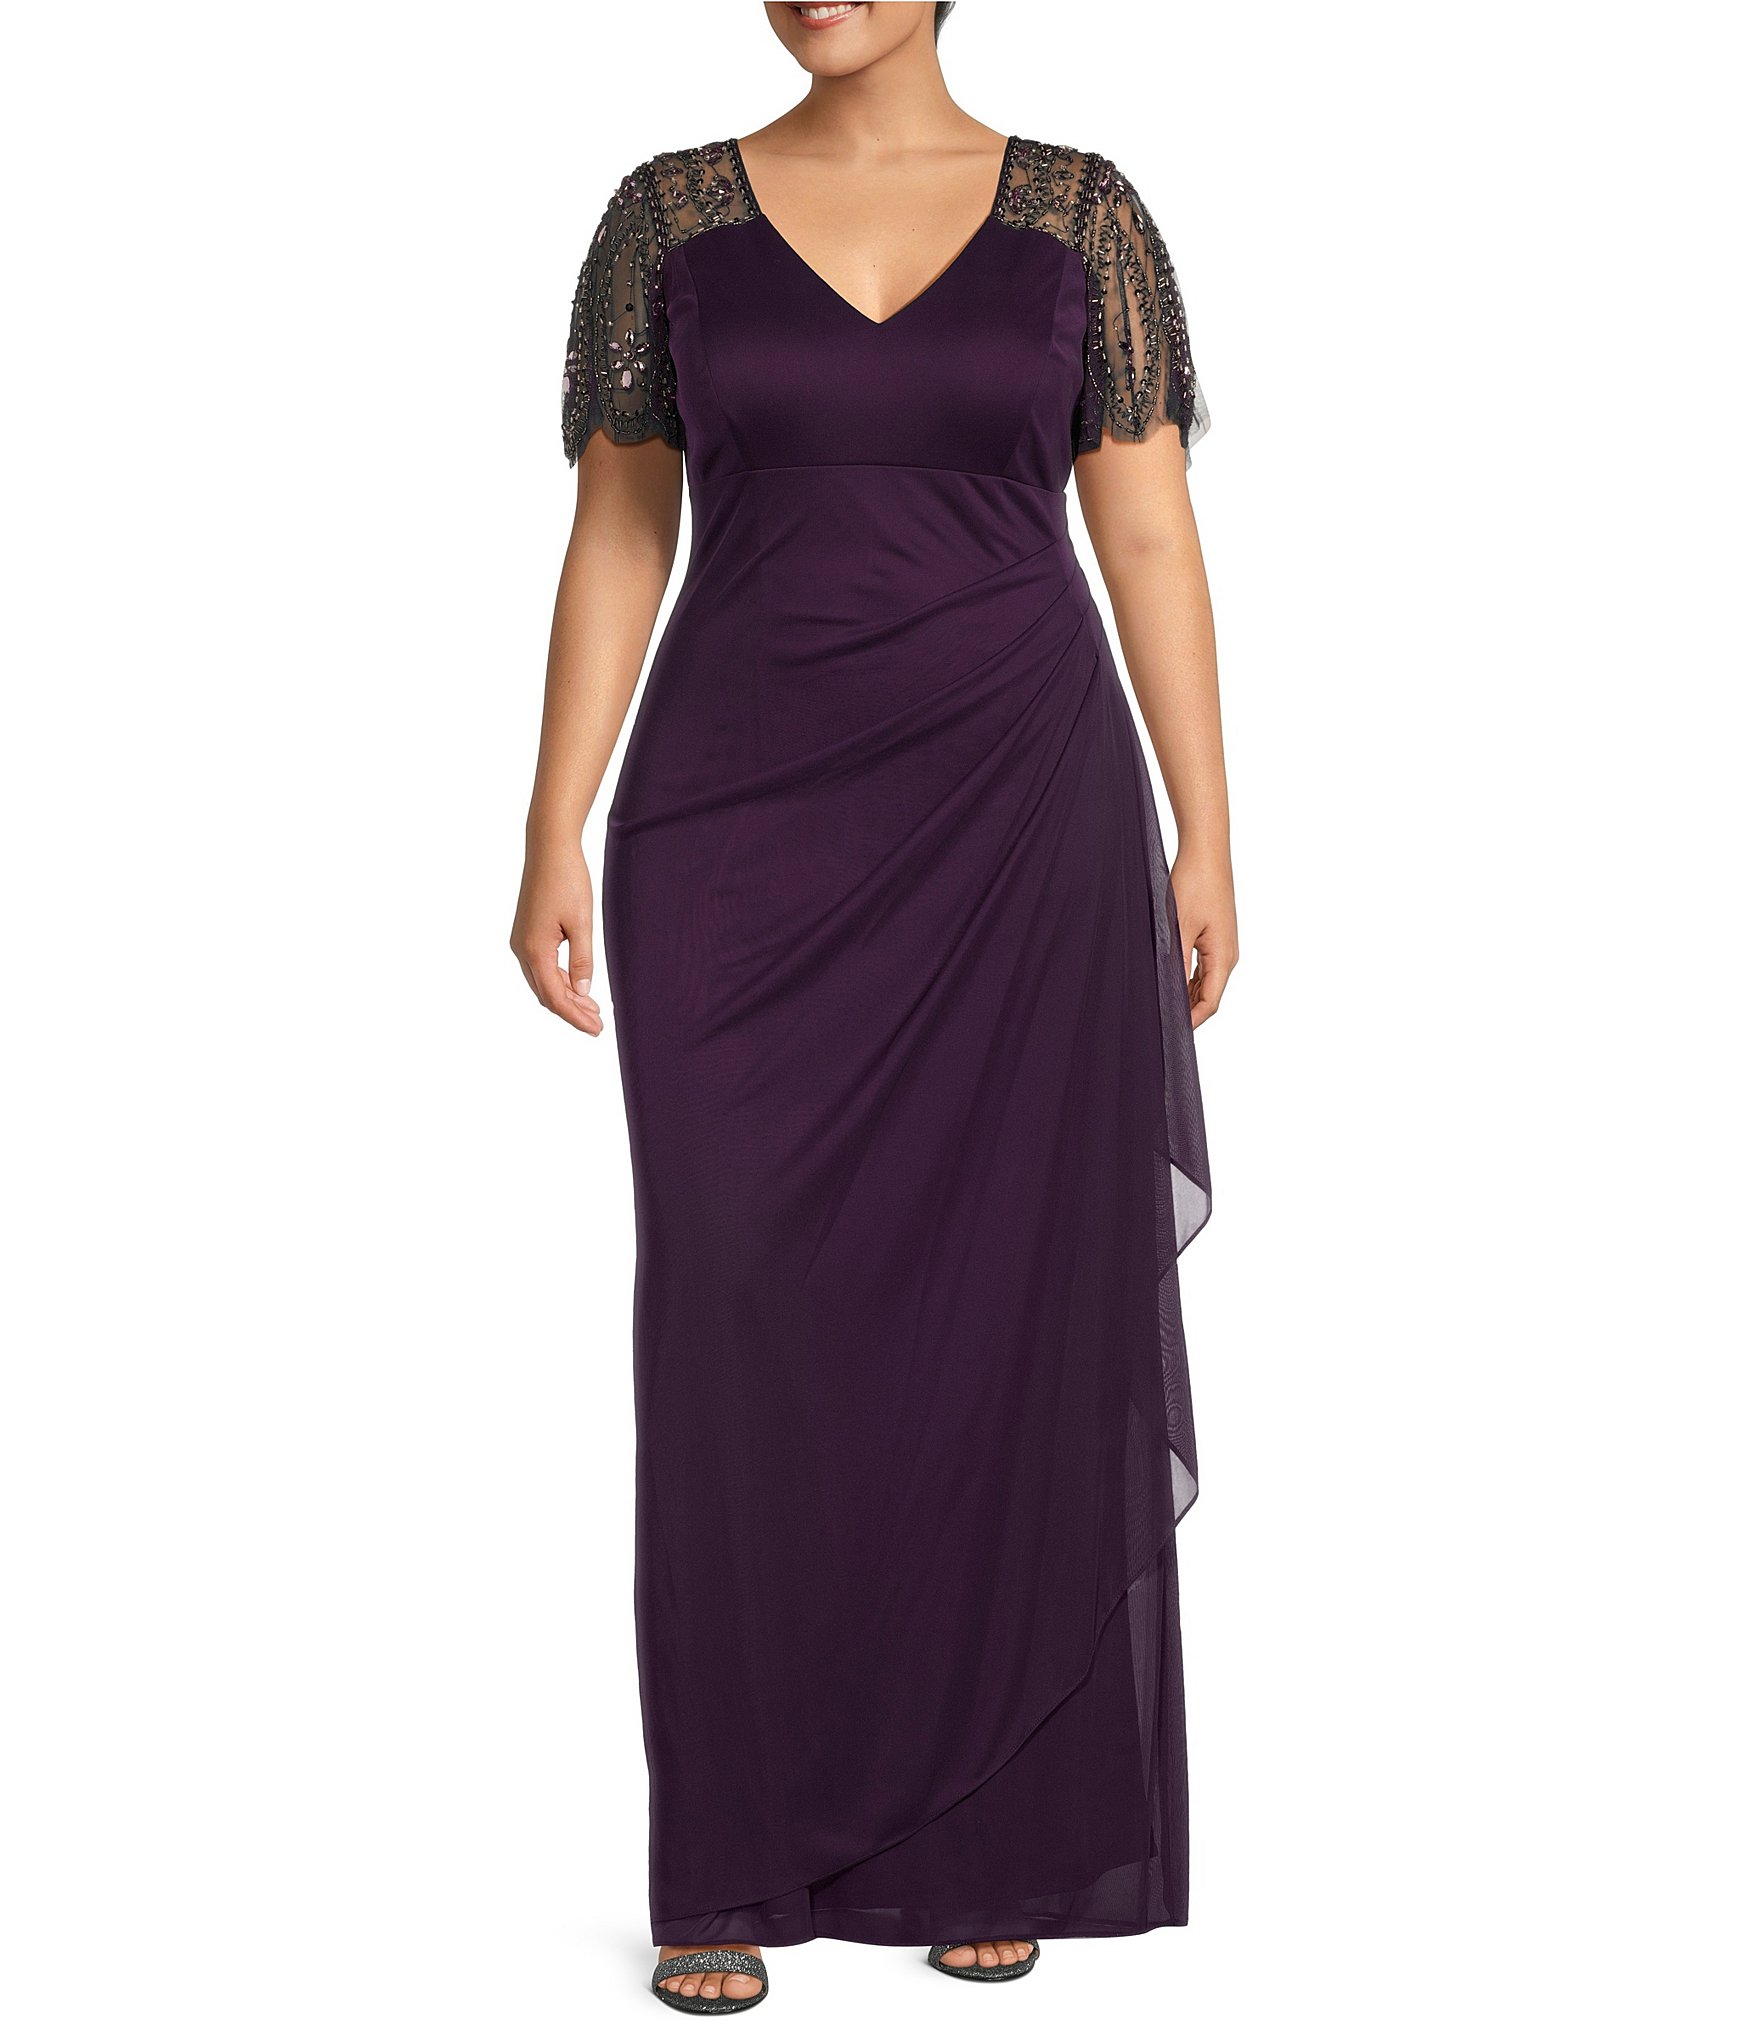 V-Neck Plus Size Mother of the Bride Dresses & Gowns